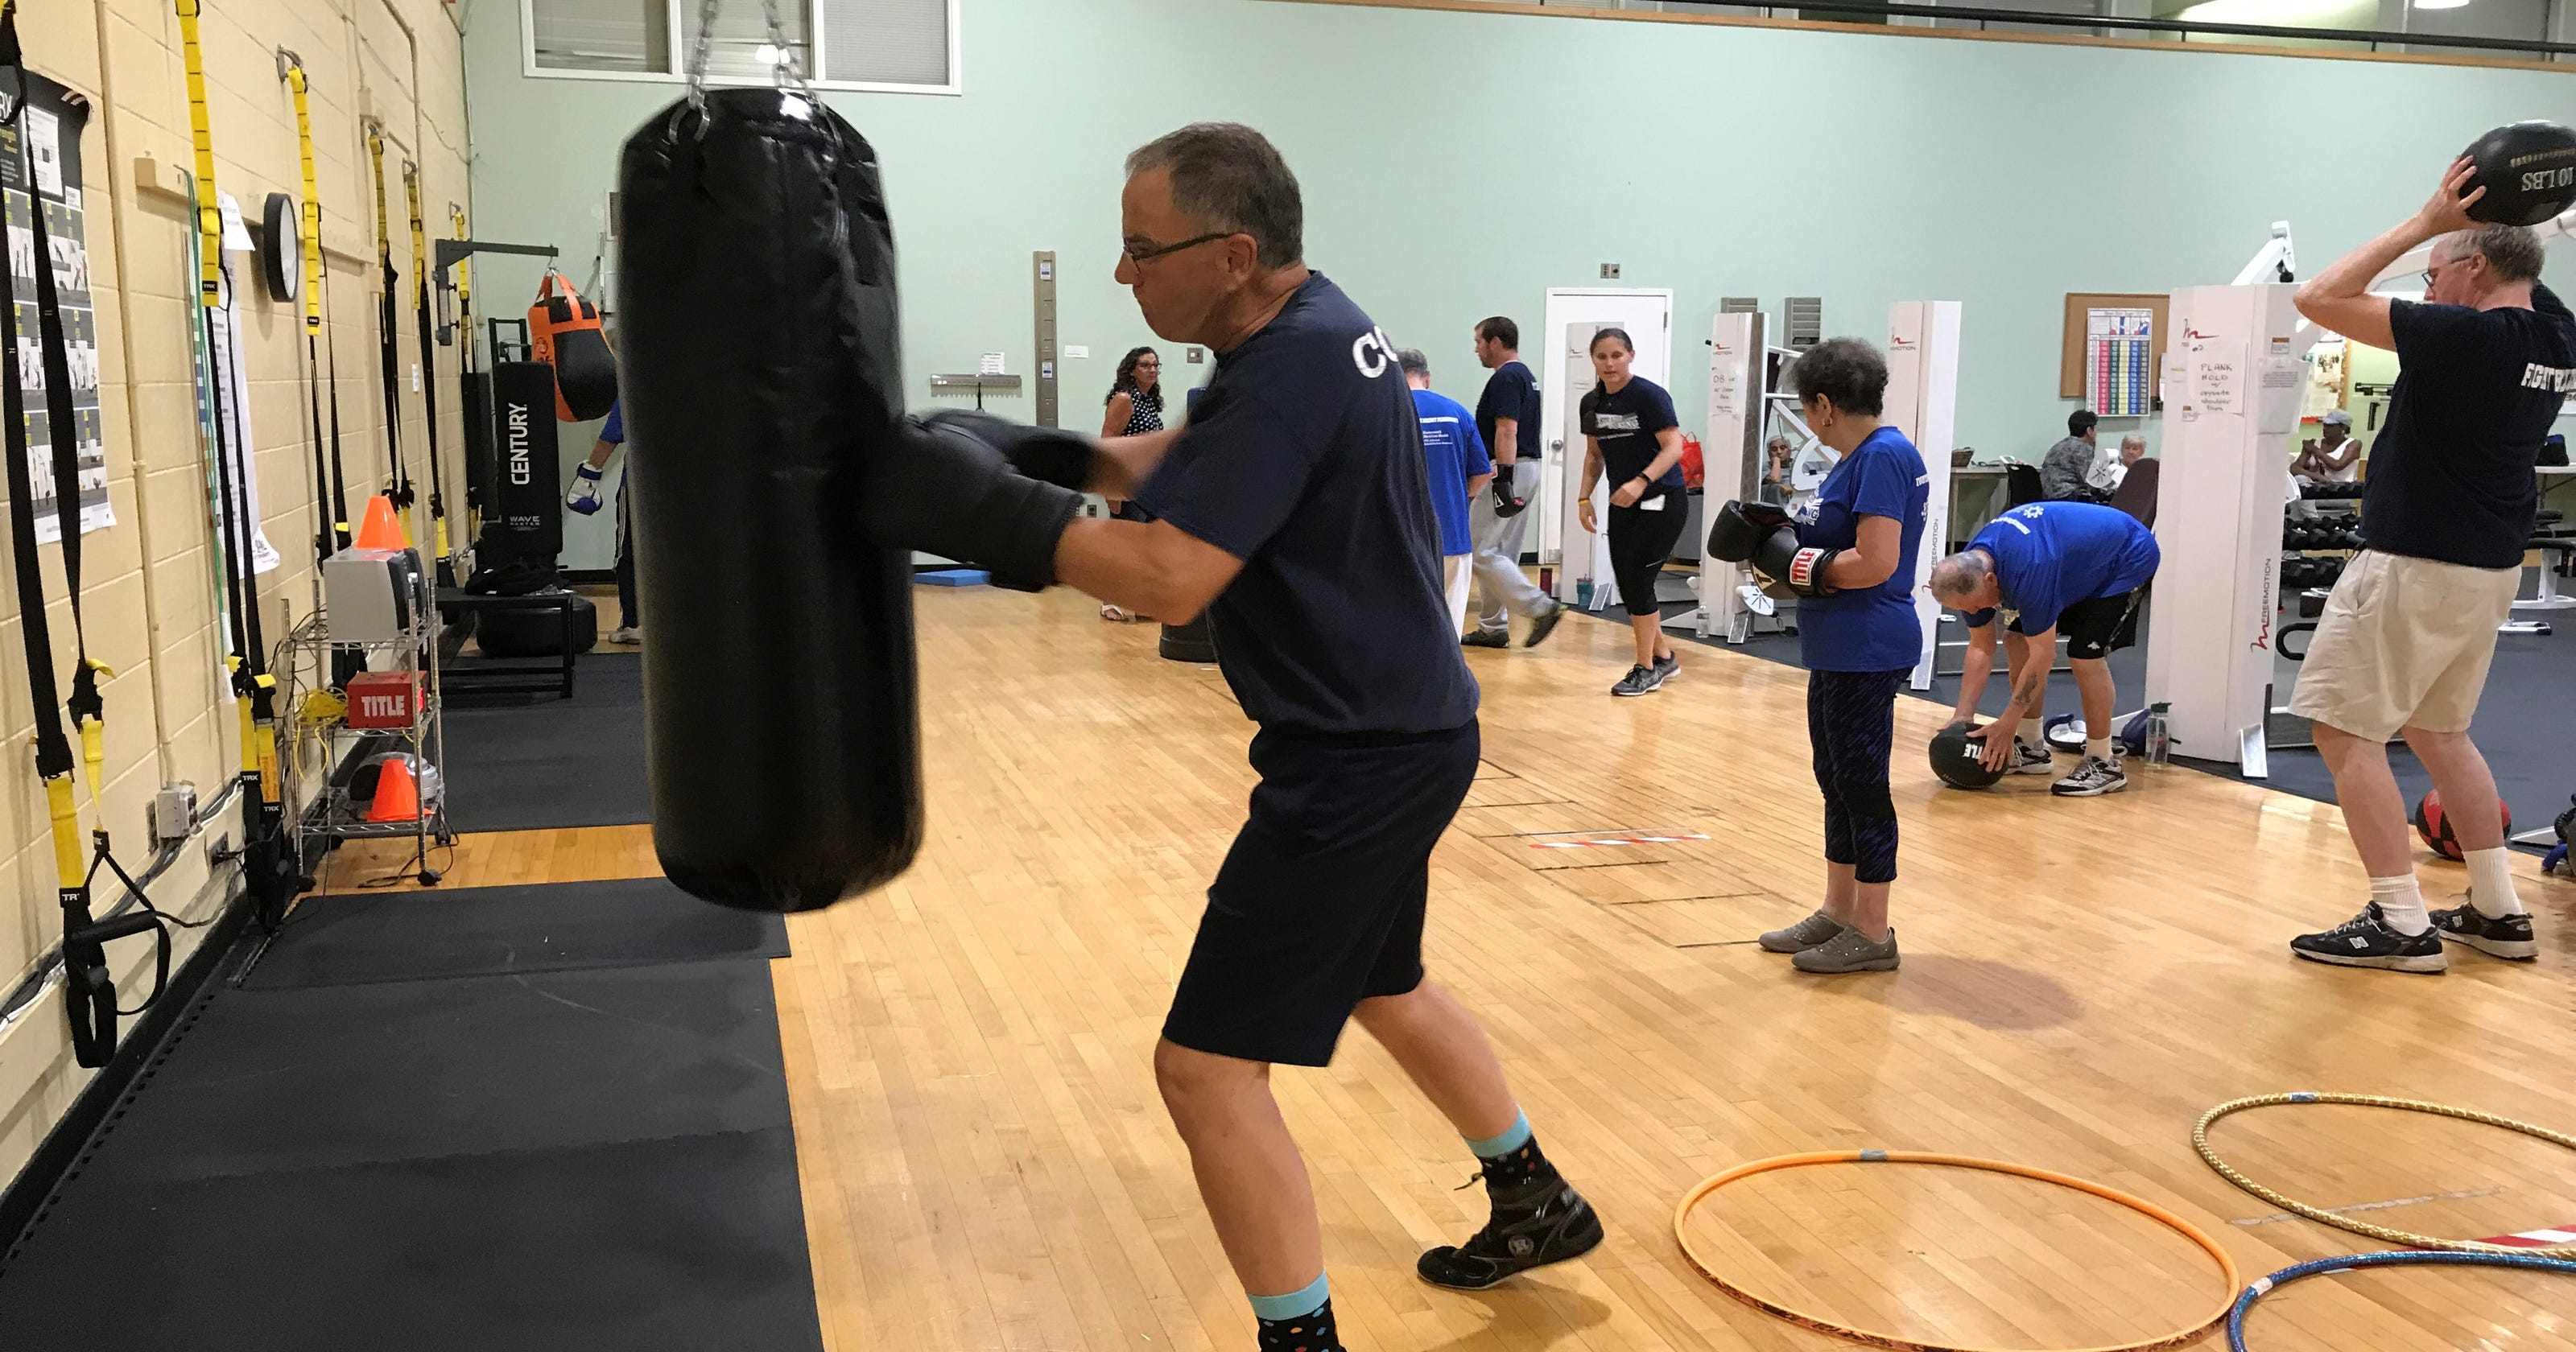 Rock Steady Boxing takes a punch at Parkinson #39 s disease during classes